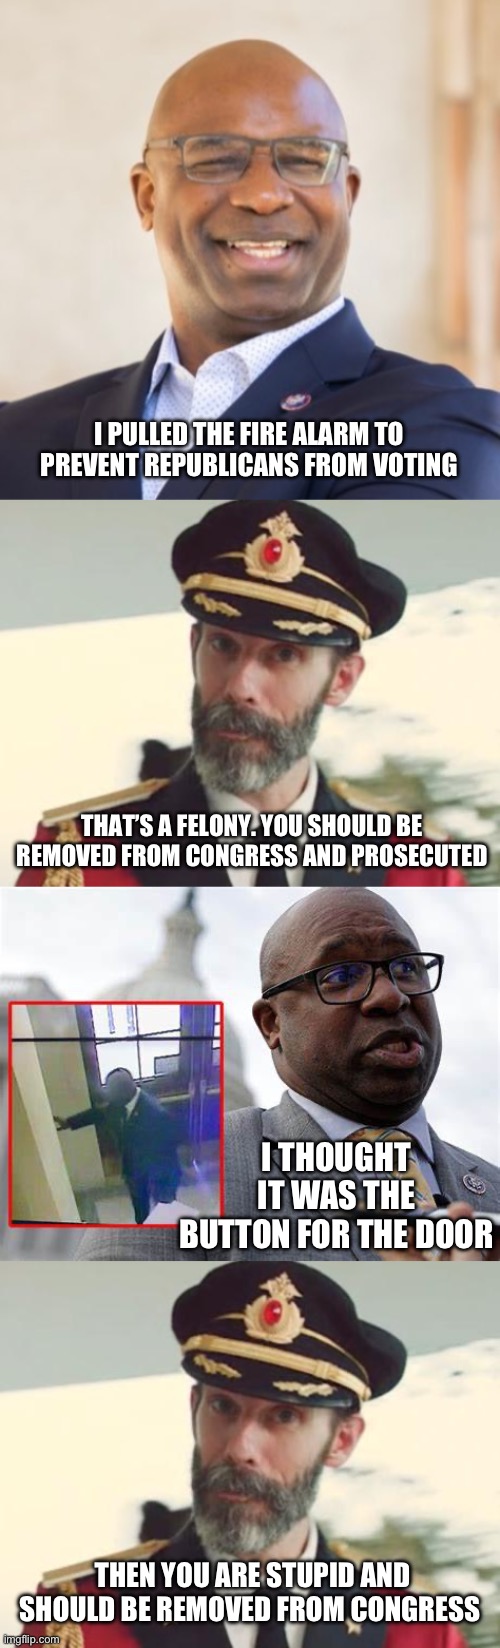 Poster child for Democrat criminals. | I PULLED THE FIRE ALARM TO PREVENT REPUBLICANS FROM VOTING; THAT’S A FELONY. YOU SHOULD BE REMOVED FROM CONGRESS AND PROSECUTED; I THOUGHT IT WAS THE BUTTON FOR THE DOOR; THEN YOU ARE STUPID AND SHOULD BE REMOVED FROM CONGRESS | image tagged in jamaal bowman,captain obvious,politics,criminals,stupid liberals,liberal hypocrisy | made w/ Imgflip meme maker